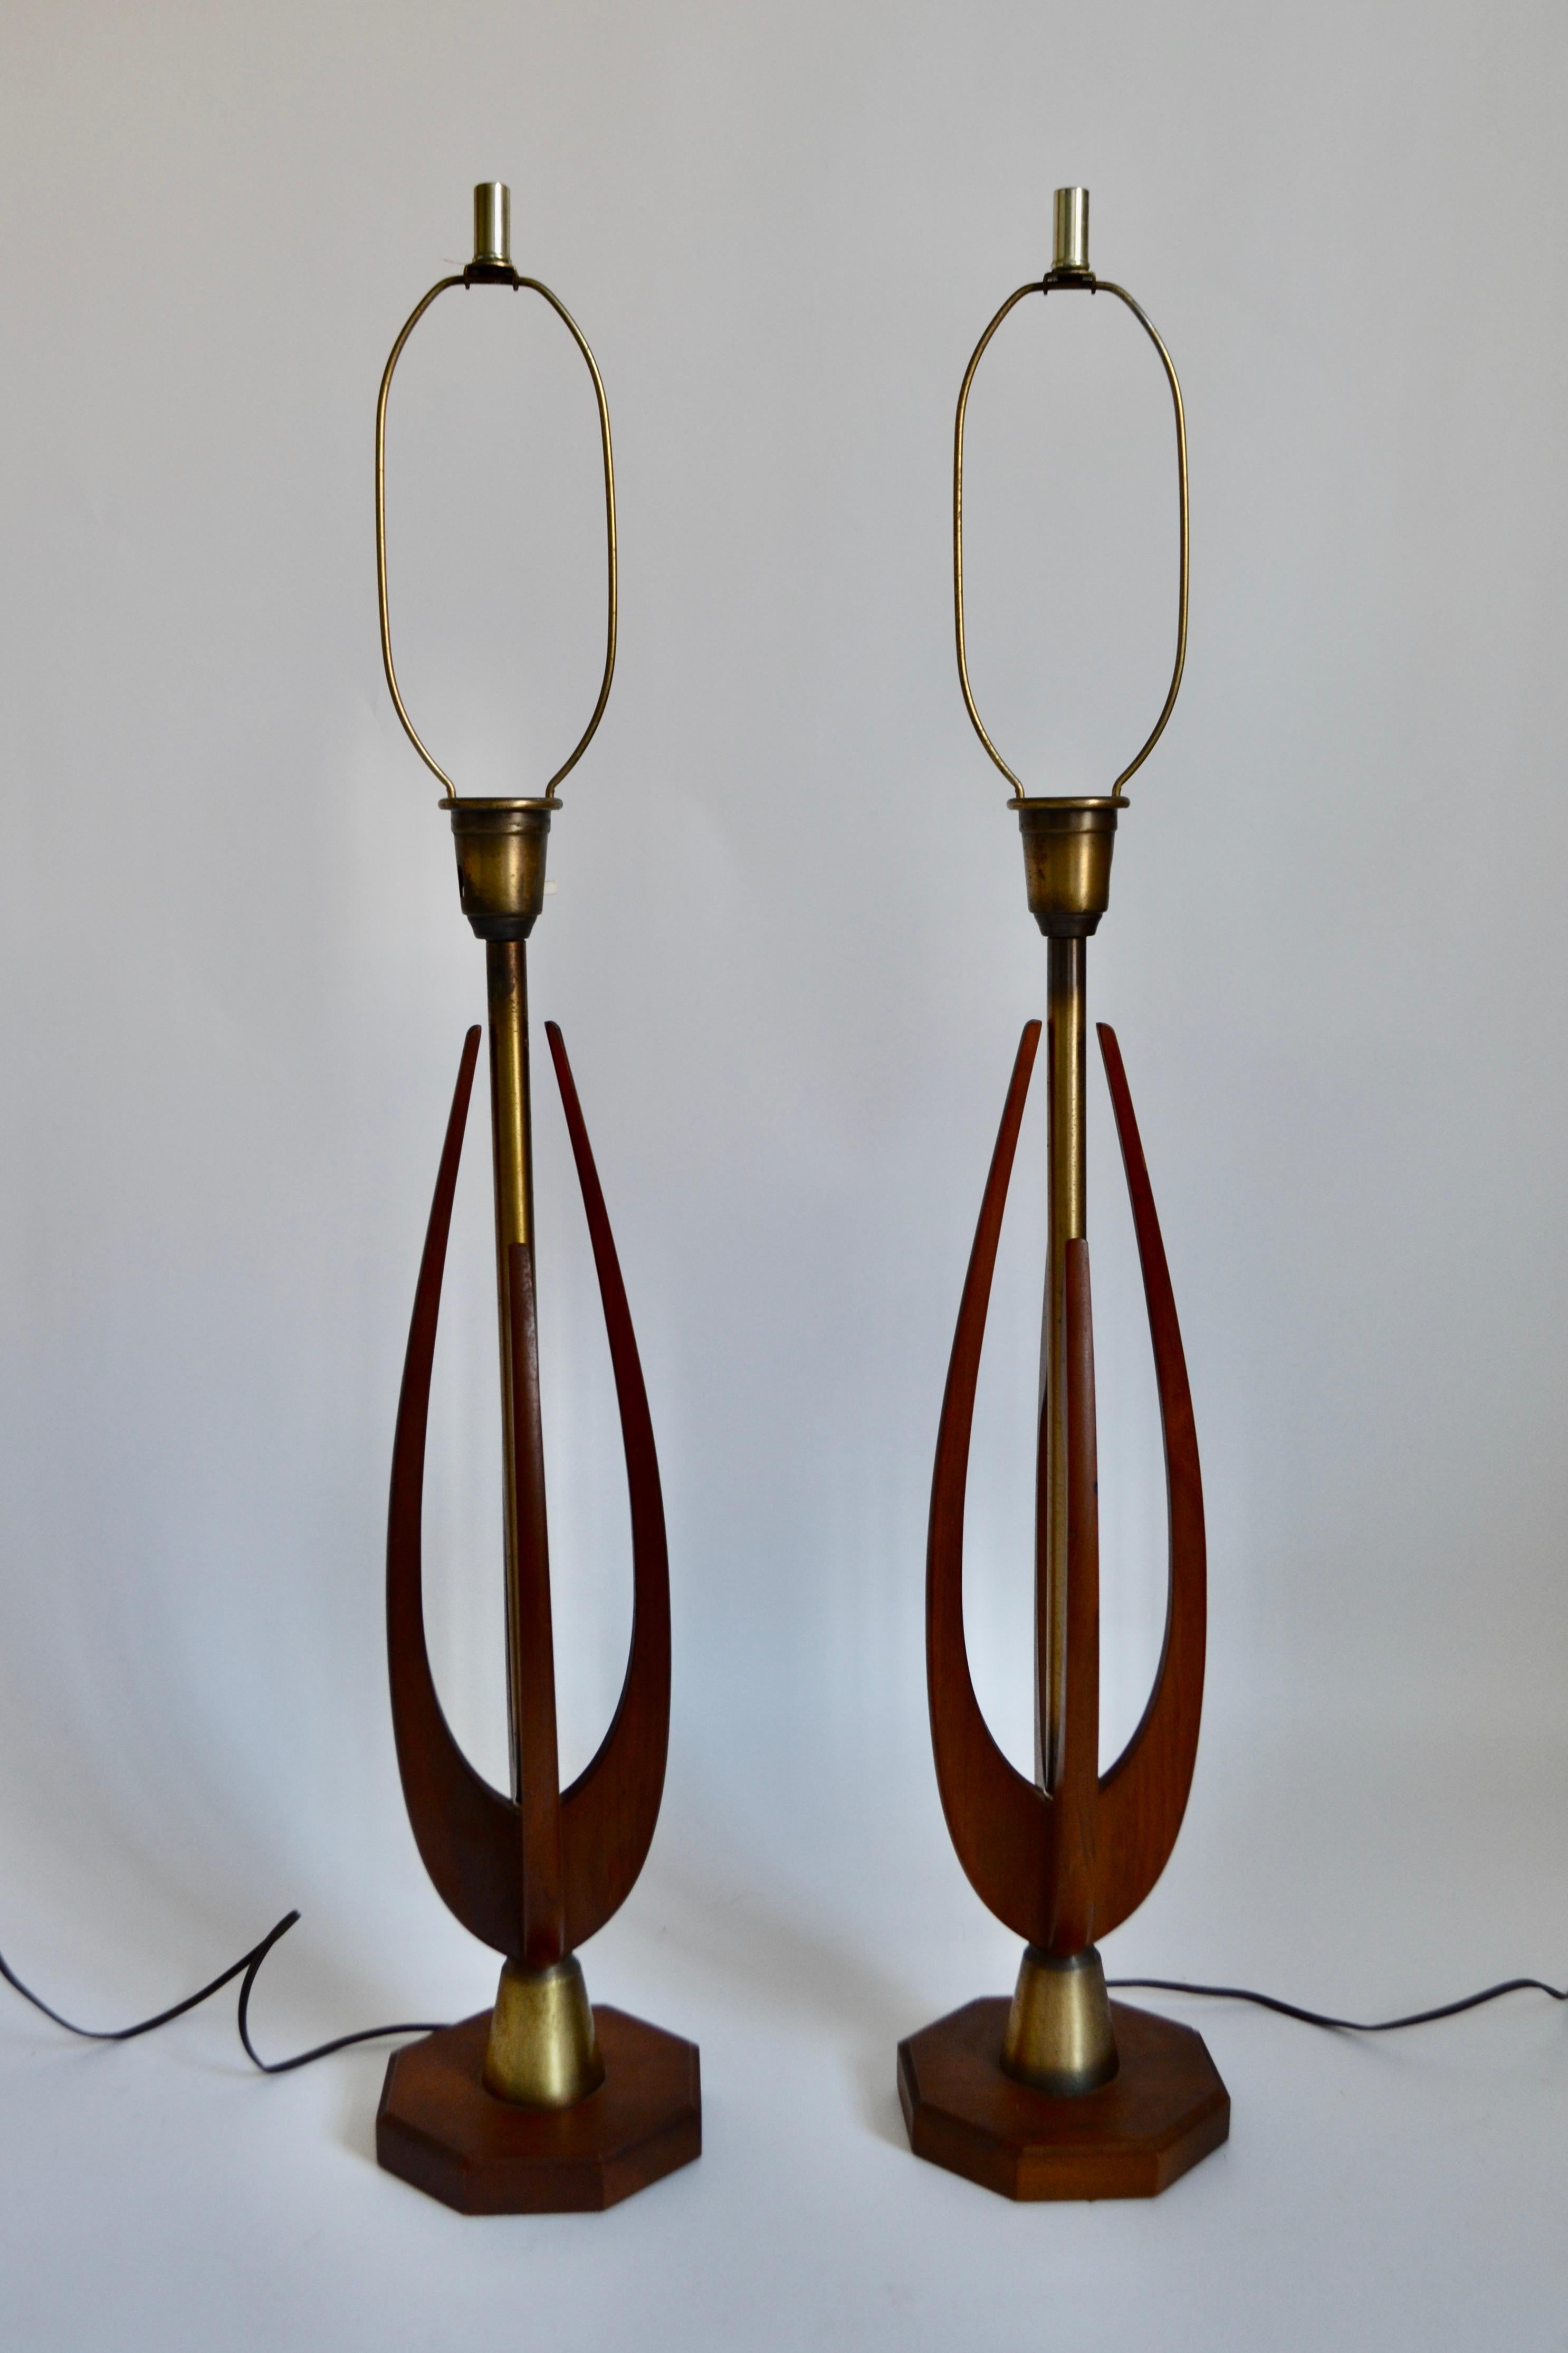 A particularly striking and tall, elegant pair of 1960s Danish solid walnut table lamps of sculptural form with a brass central column. UK plug.